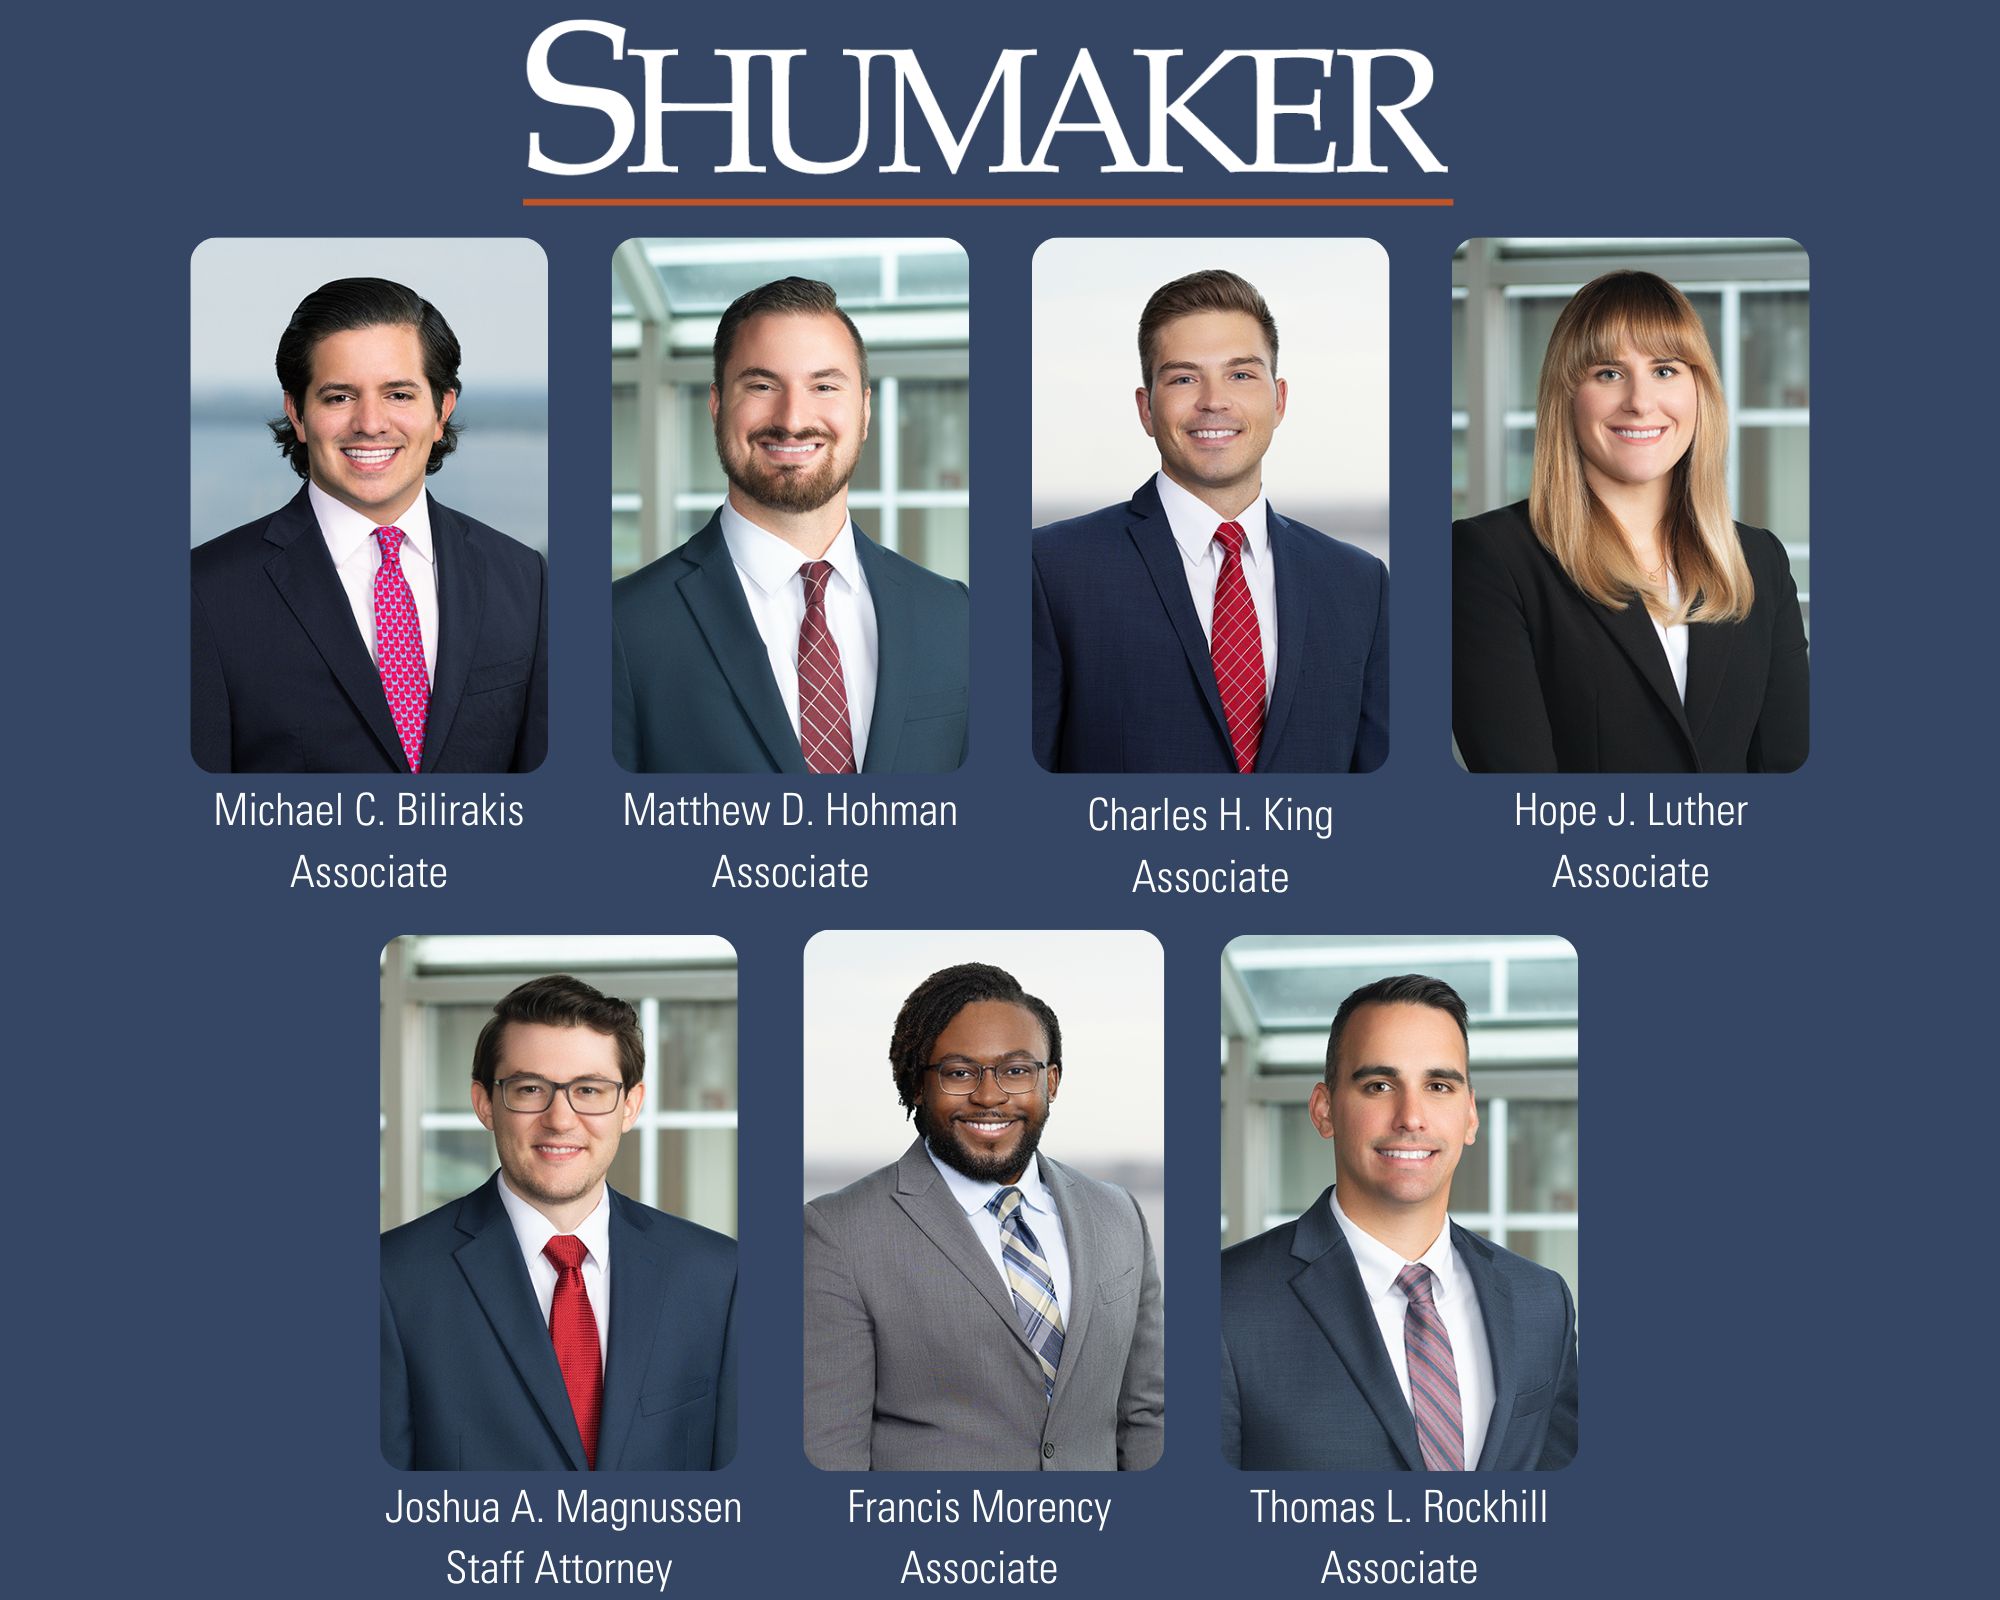 Shumaker Expands its Team: Welcomes Seven New Lawyers to Fuel Continued Growth